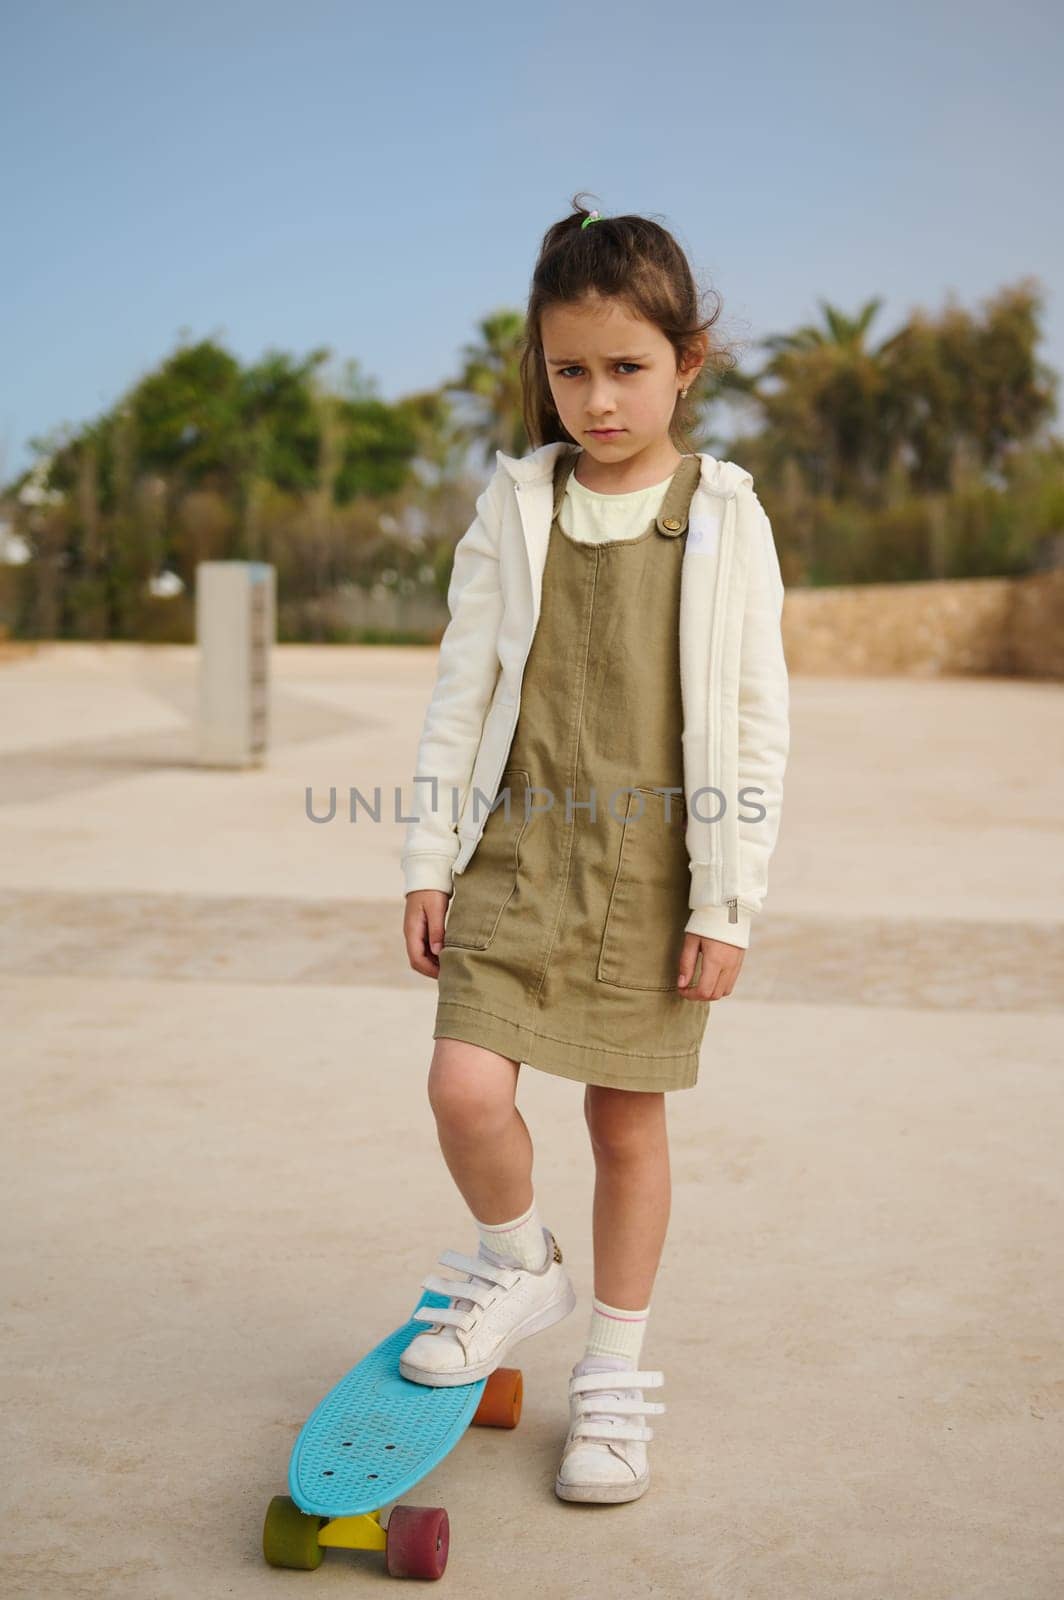 Upset Caucasian child girl standing on her skateboard on one leg, expressing sad emotions, looking at camera, feeling upset having difficulties on skateboarding, standing alone on skatepark playground